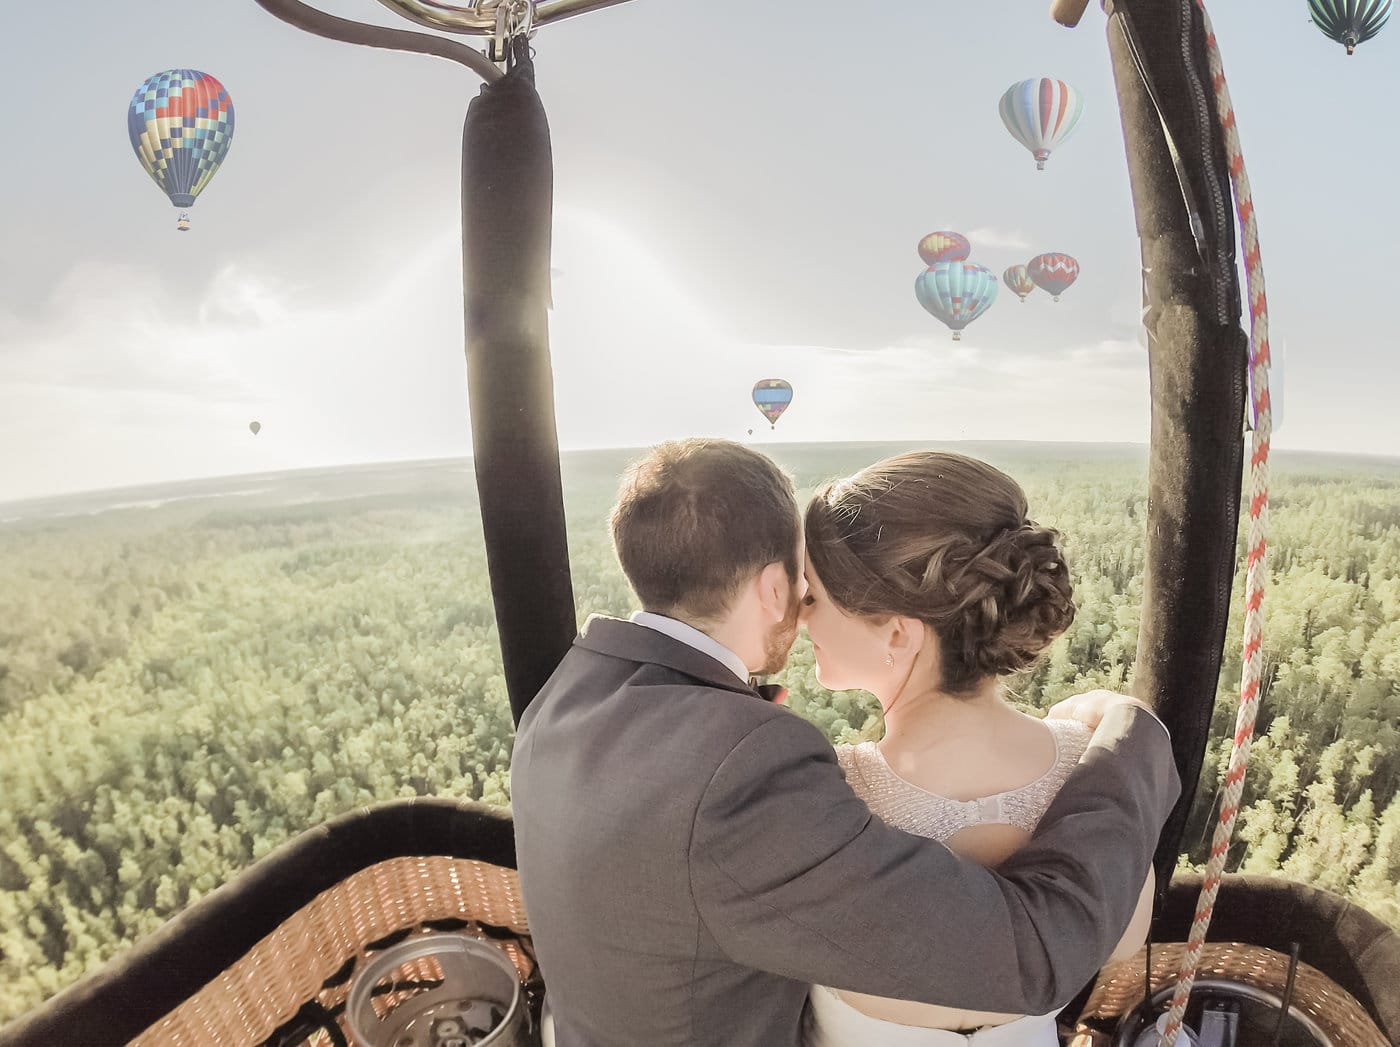 bride and groom pressing foreheads together inside basket of hot air balloon with balloons all around the horizon in the air